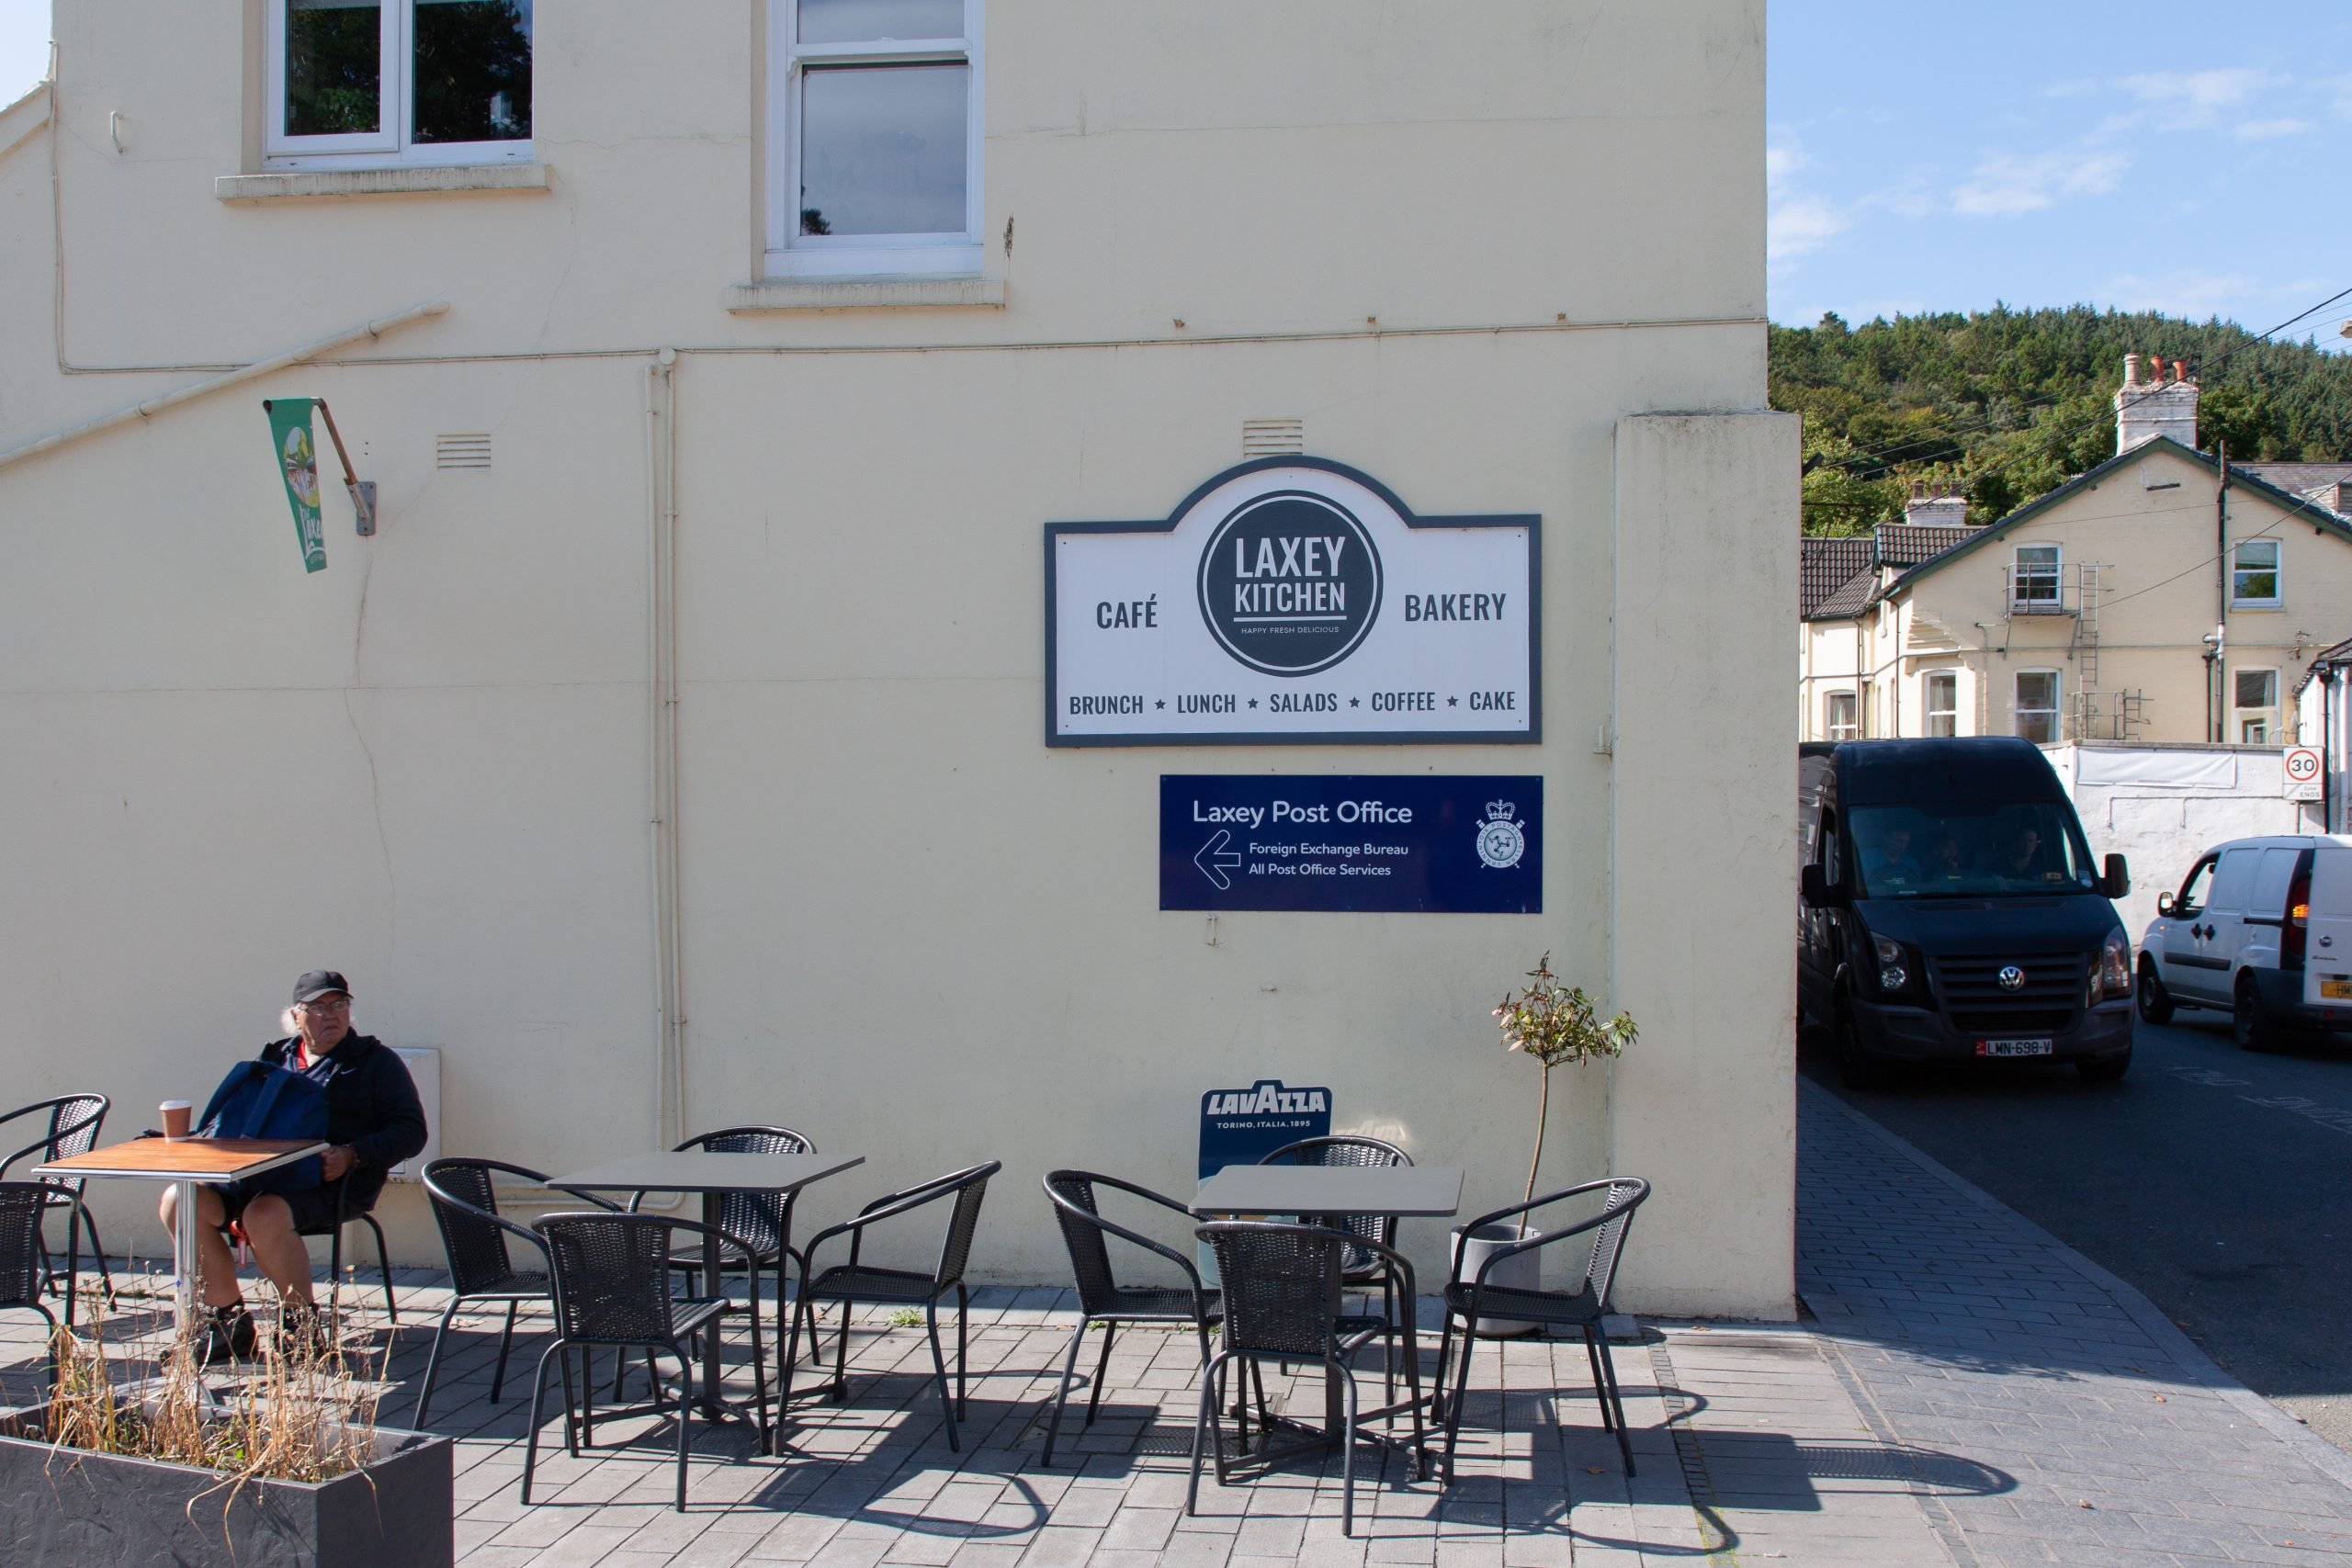 Laxey Kitchen New Road, Laxey IM4